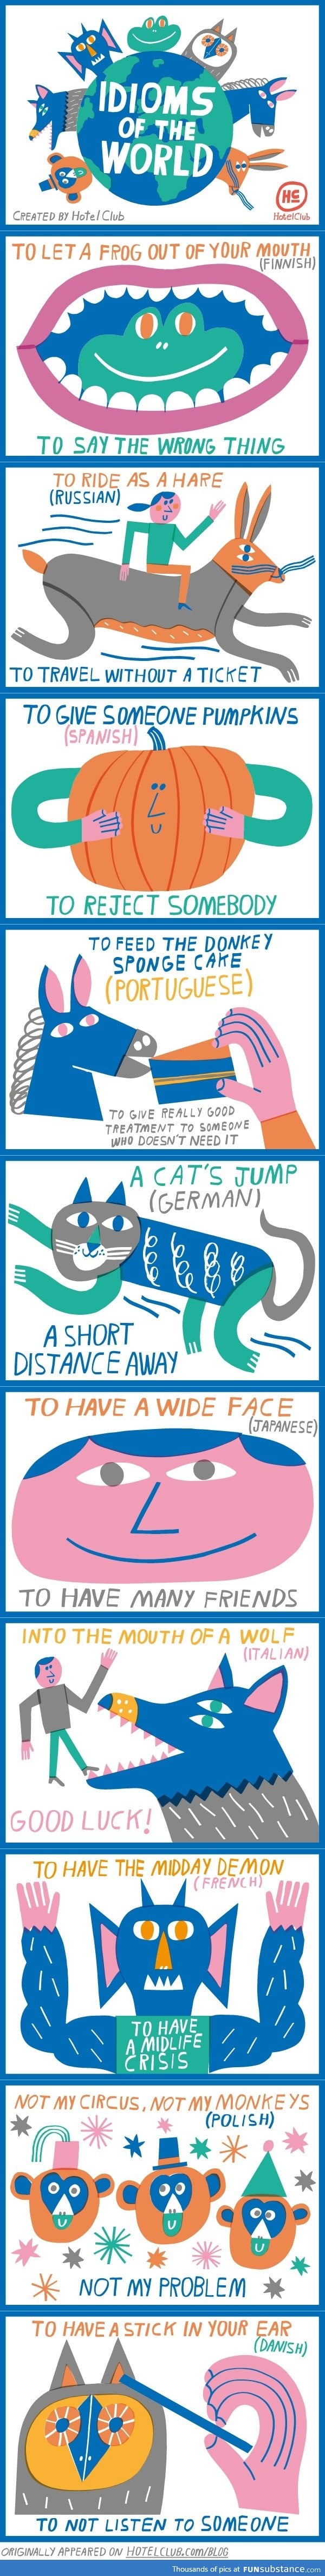 Idioms of the world.